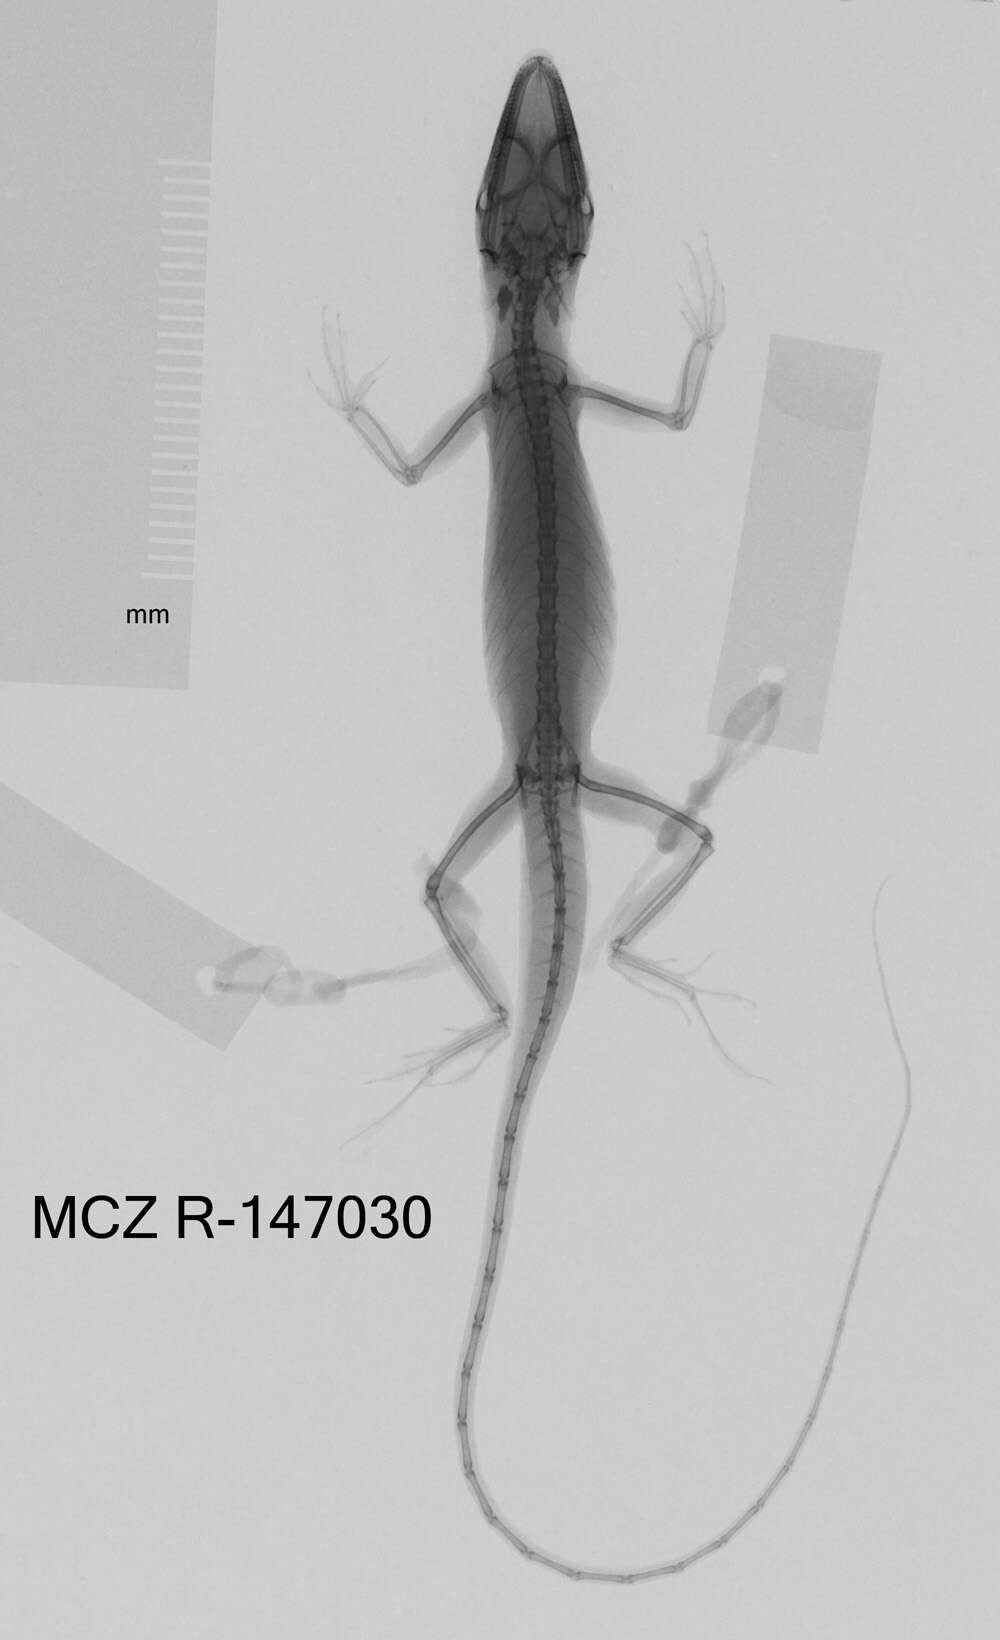 Image of Veronica's  Anole